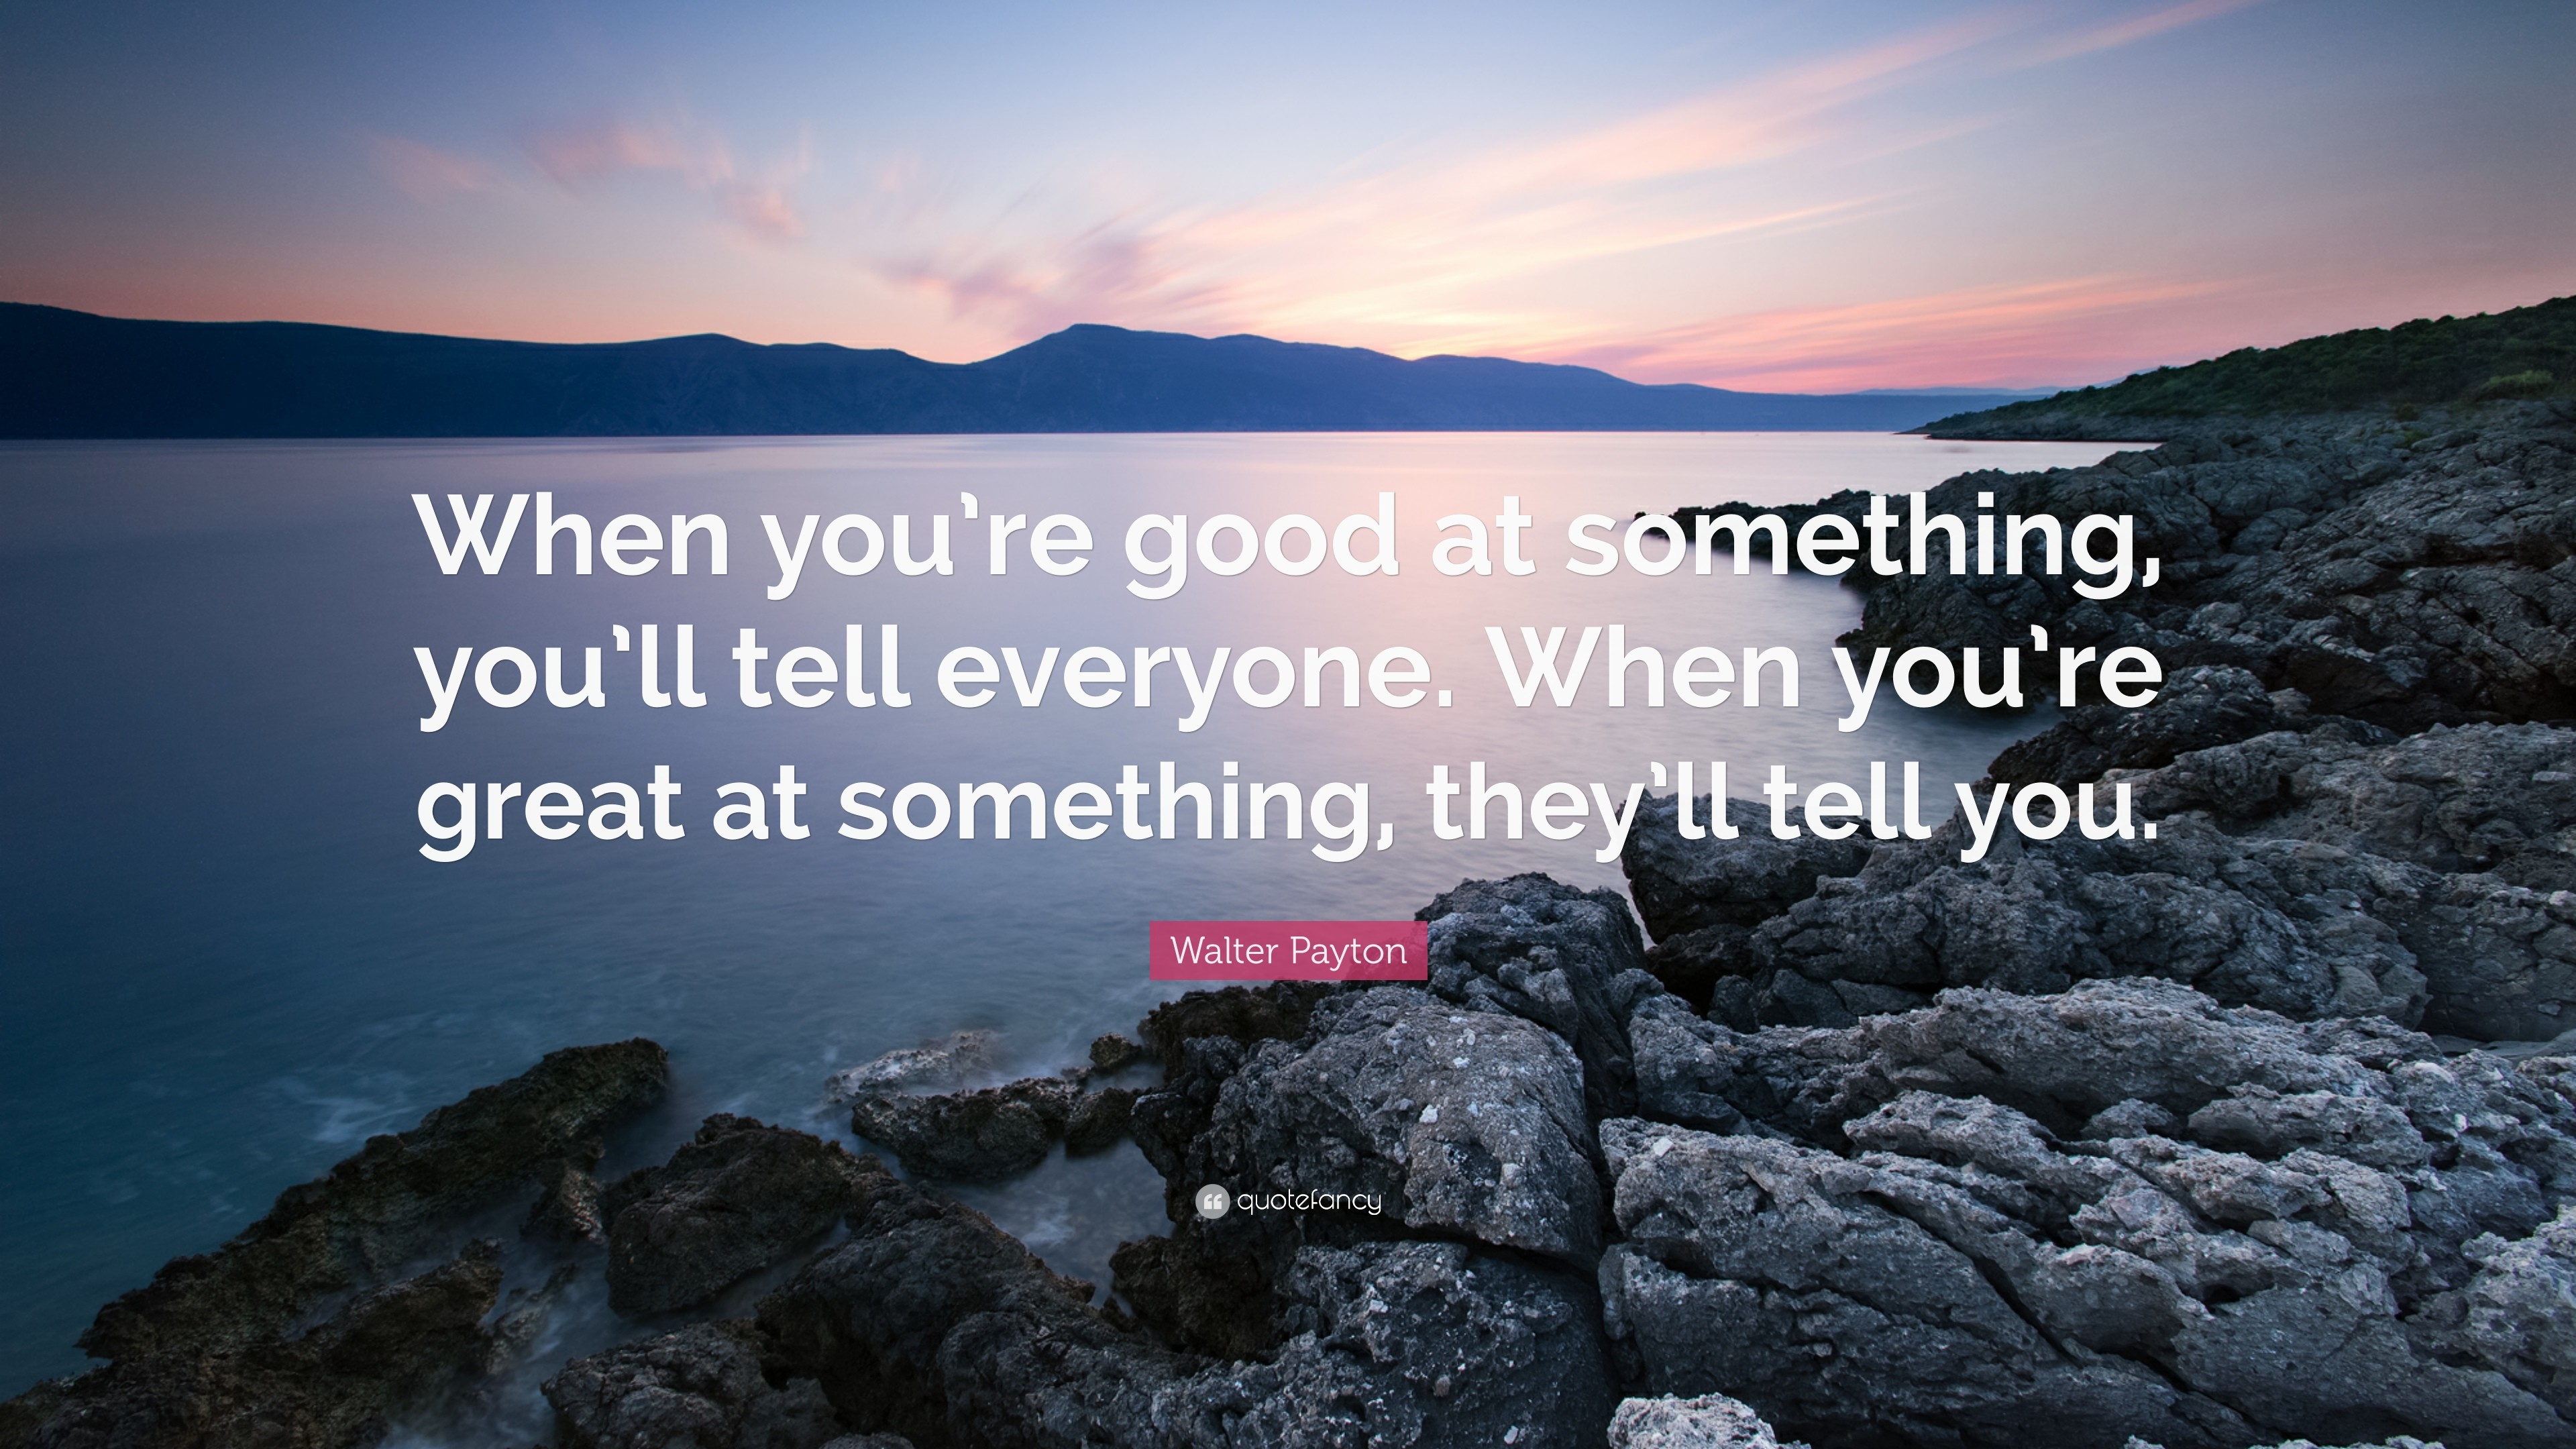 3840x2160 Walter Payton Quote: “When you're good at something, you'll